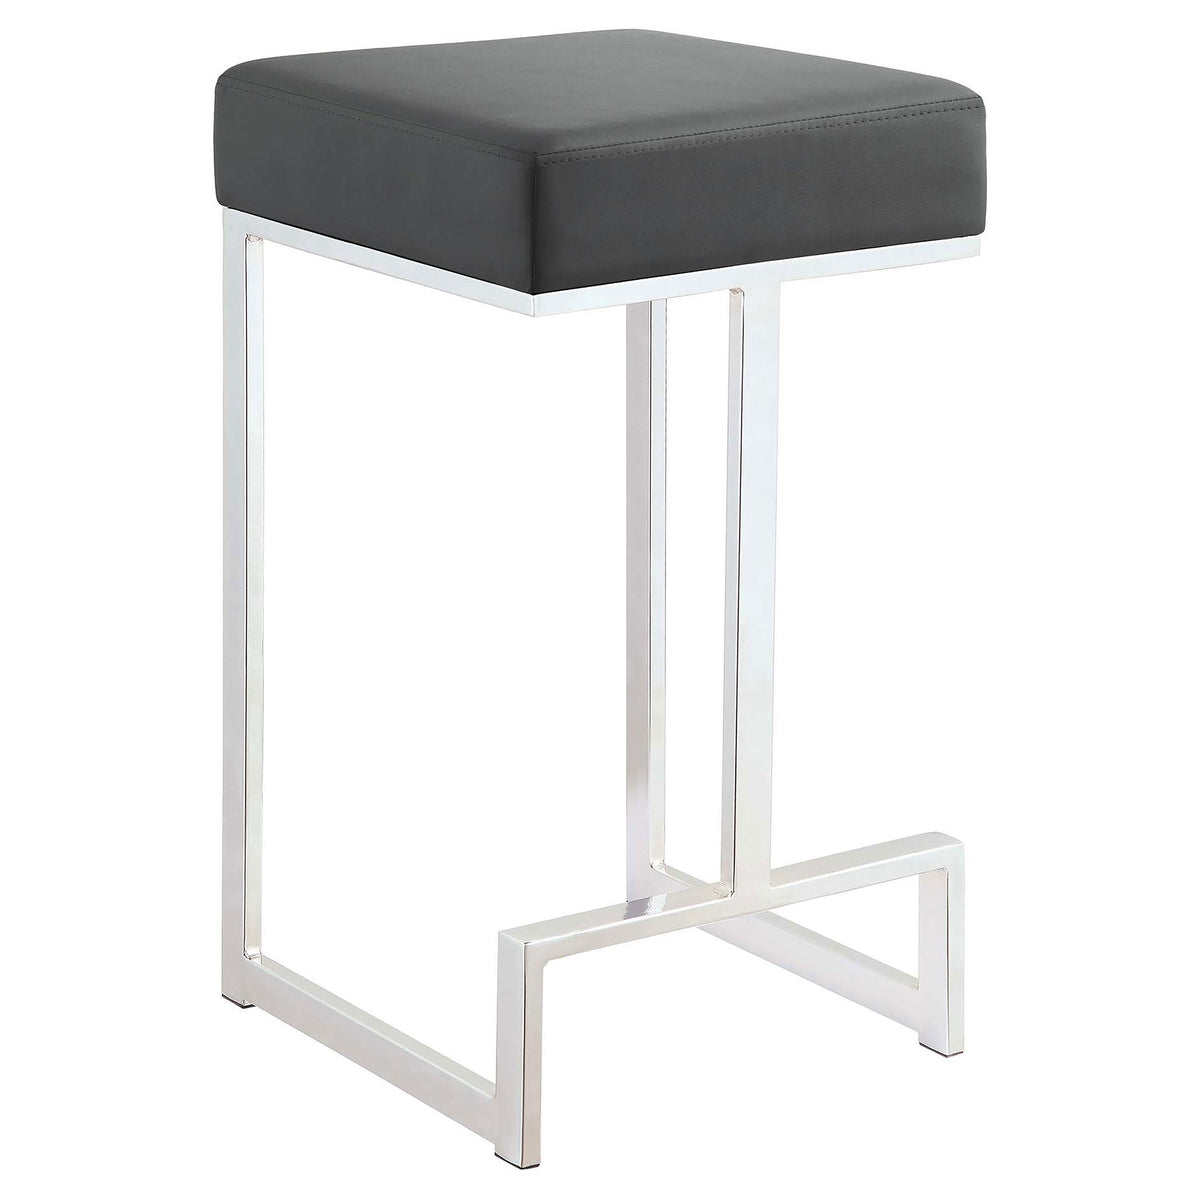 Gervase Square Counter Height Stool Grey and Chrome Gervase Square Counter Height Stool Grey and Chrome Half Price Furniture